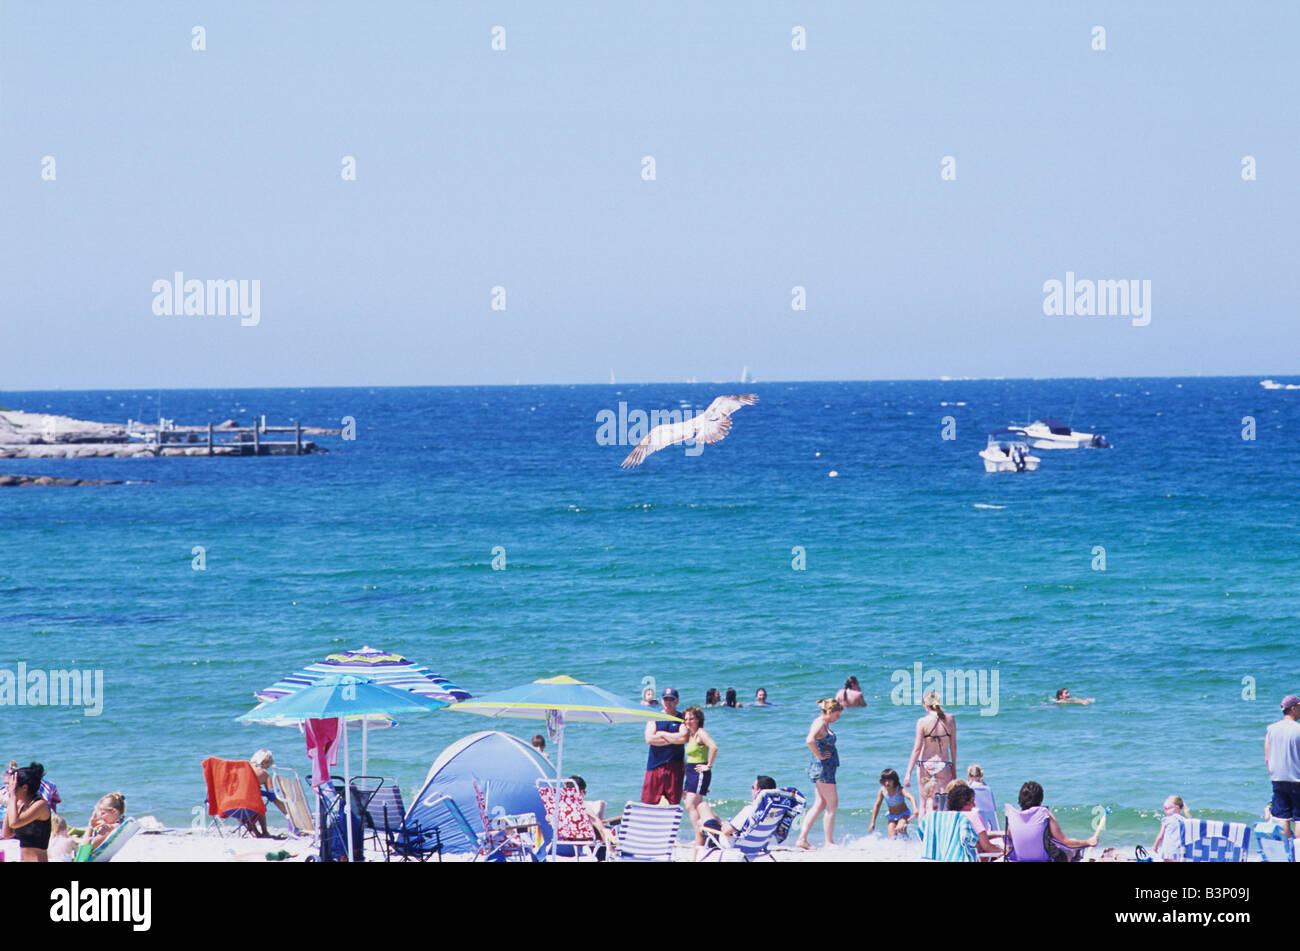 Crowd of people enjoying the sun and water at Old Silver Beach, Falmouth on Cape Cod with umbrellas and bathing suits Stock Photo